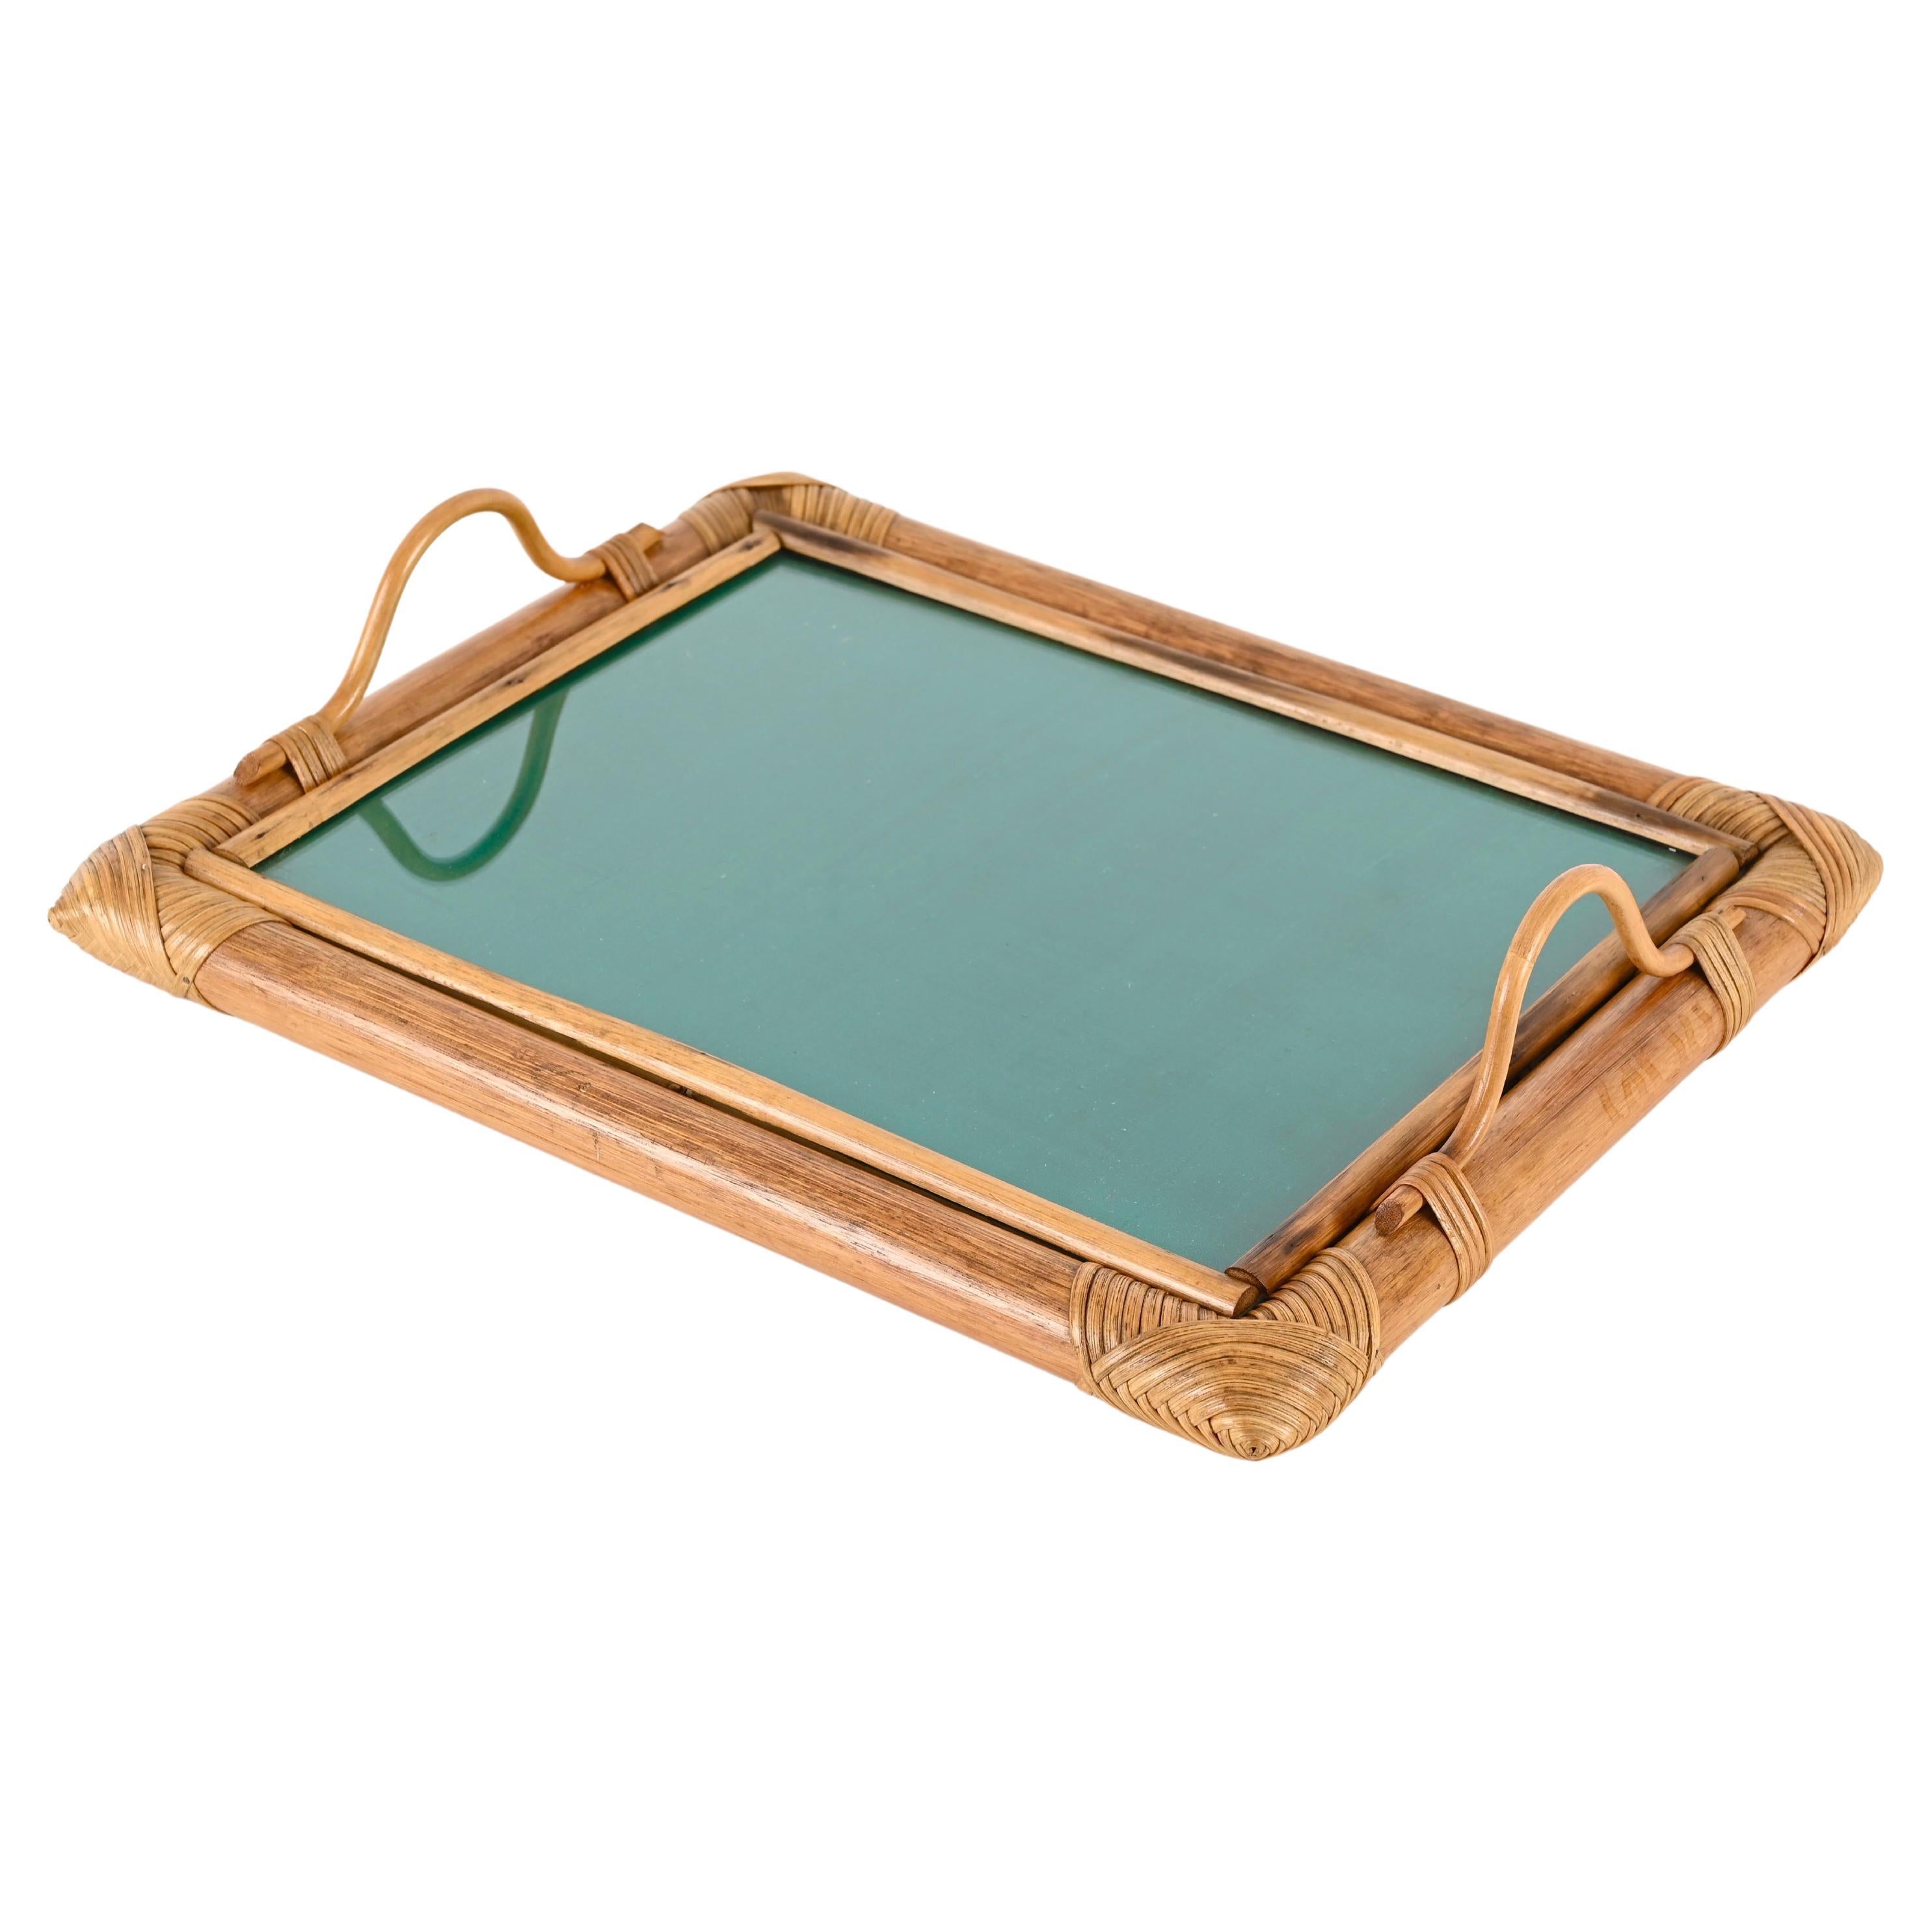 French Riviera Serving Tray in Bamboo and Rattan W/ Green Interior, Italy 1970s For Sale